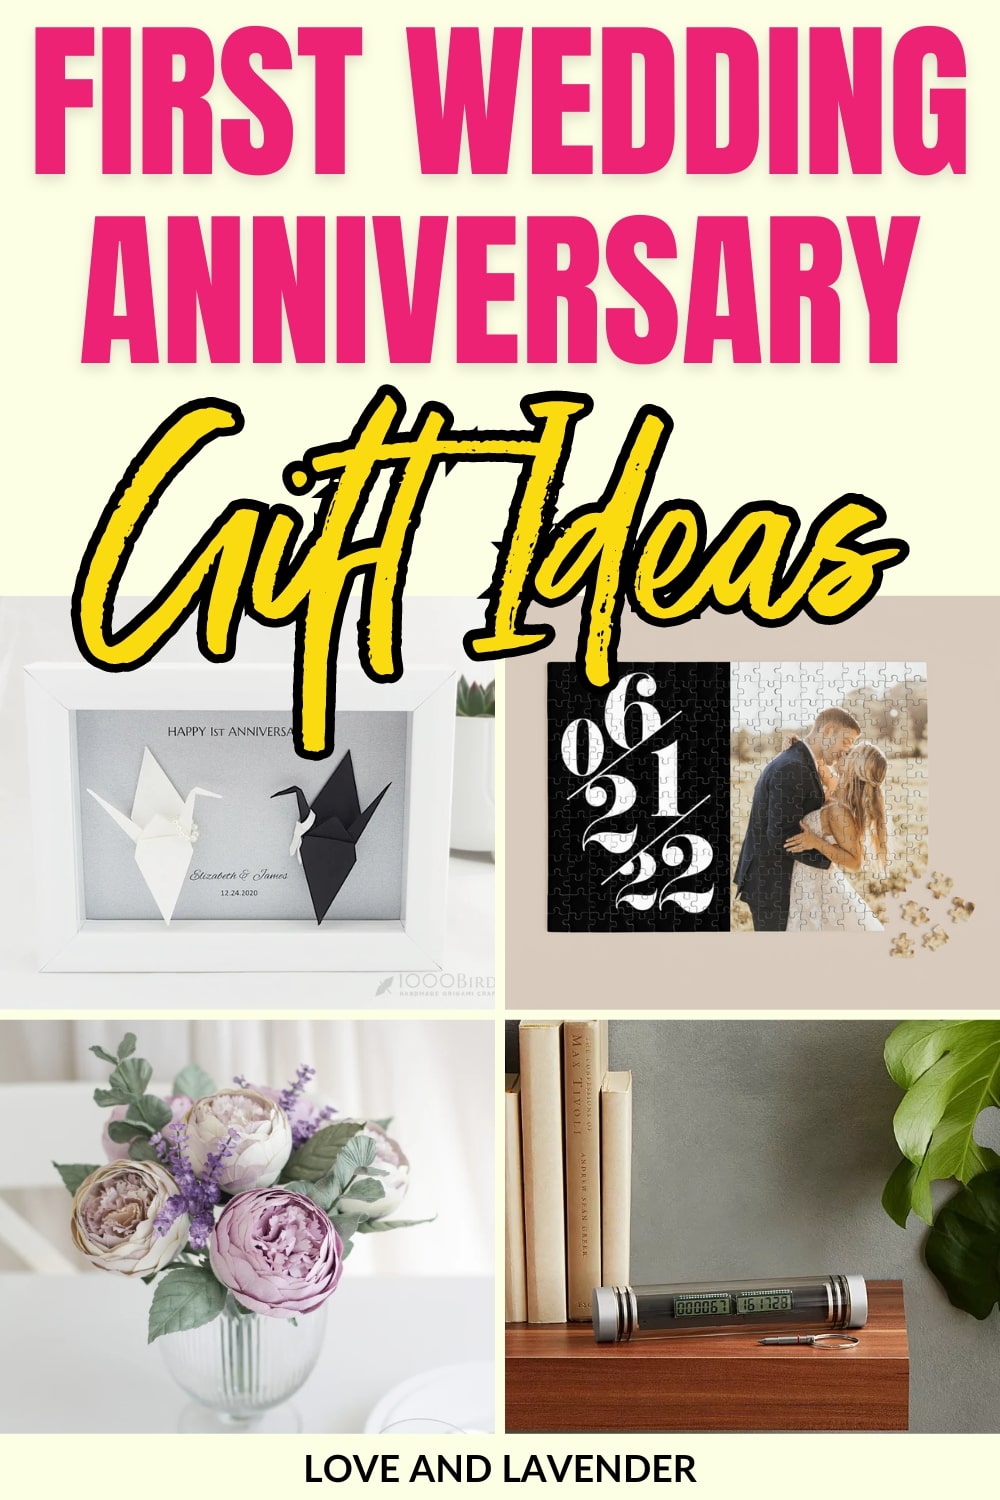 The Best Homemade Anniversary Gifts and Ideas | Shutterfly